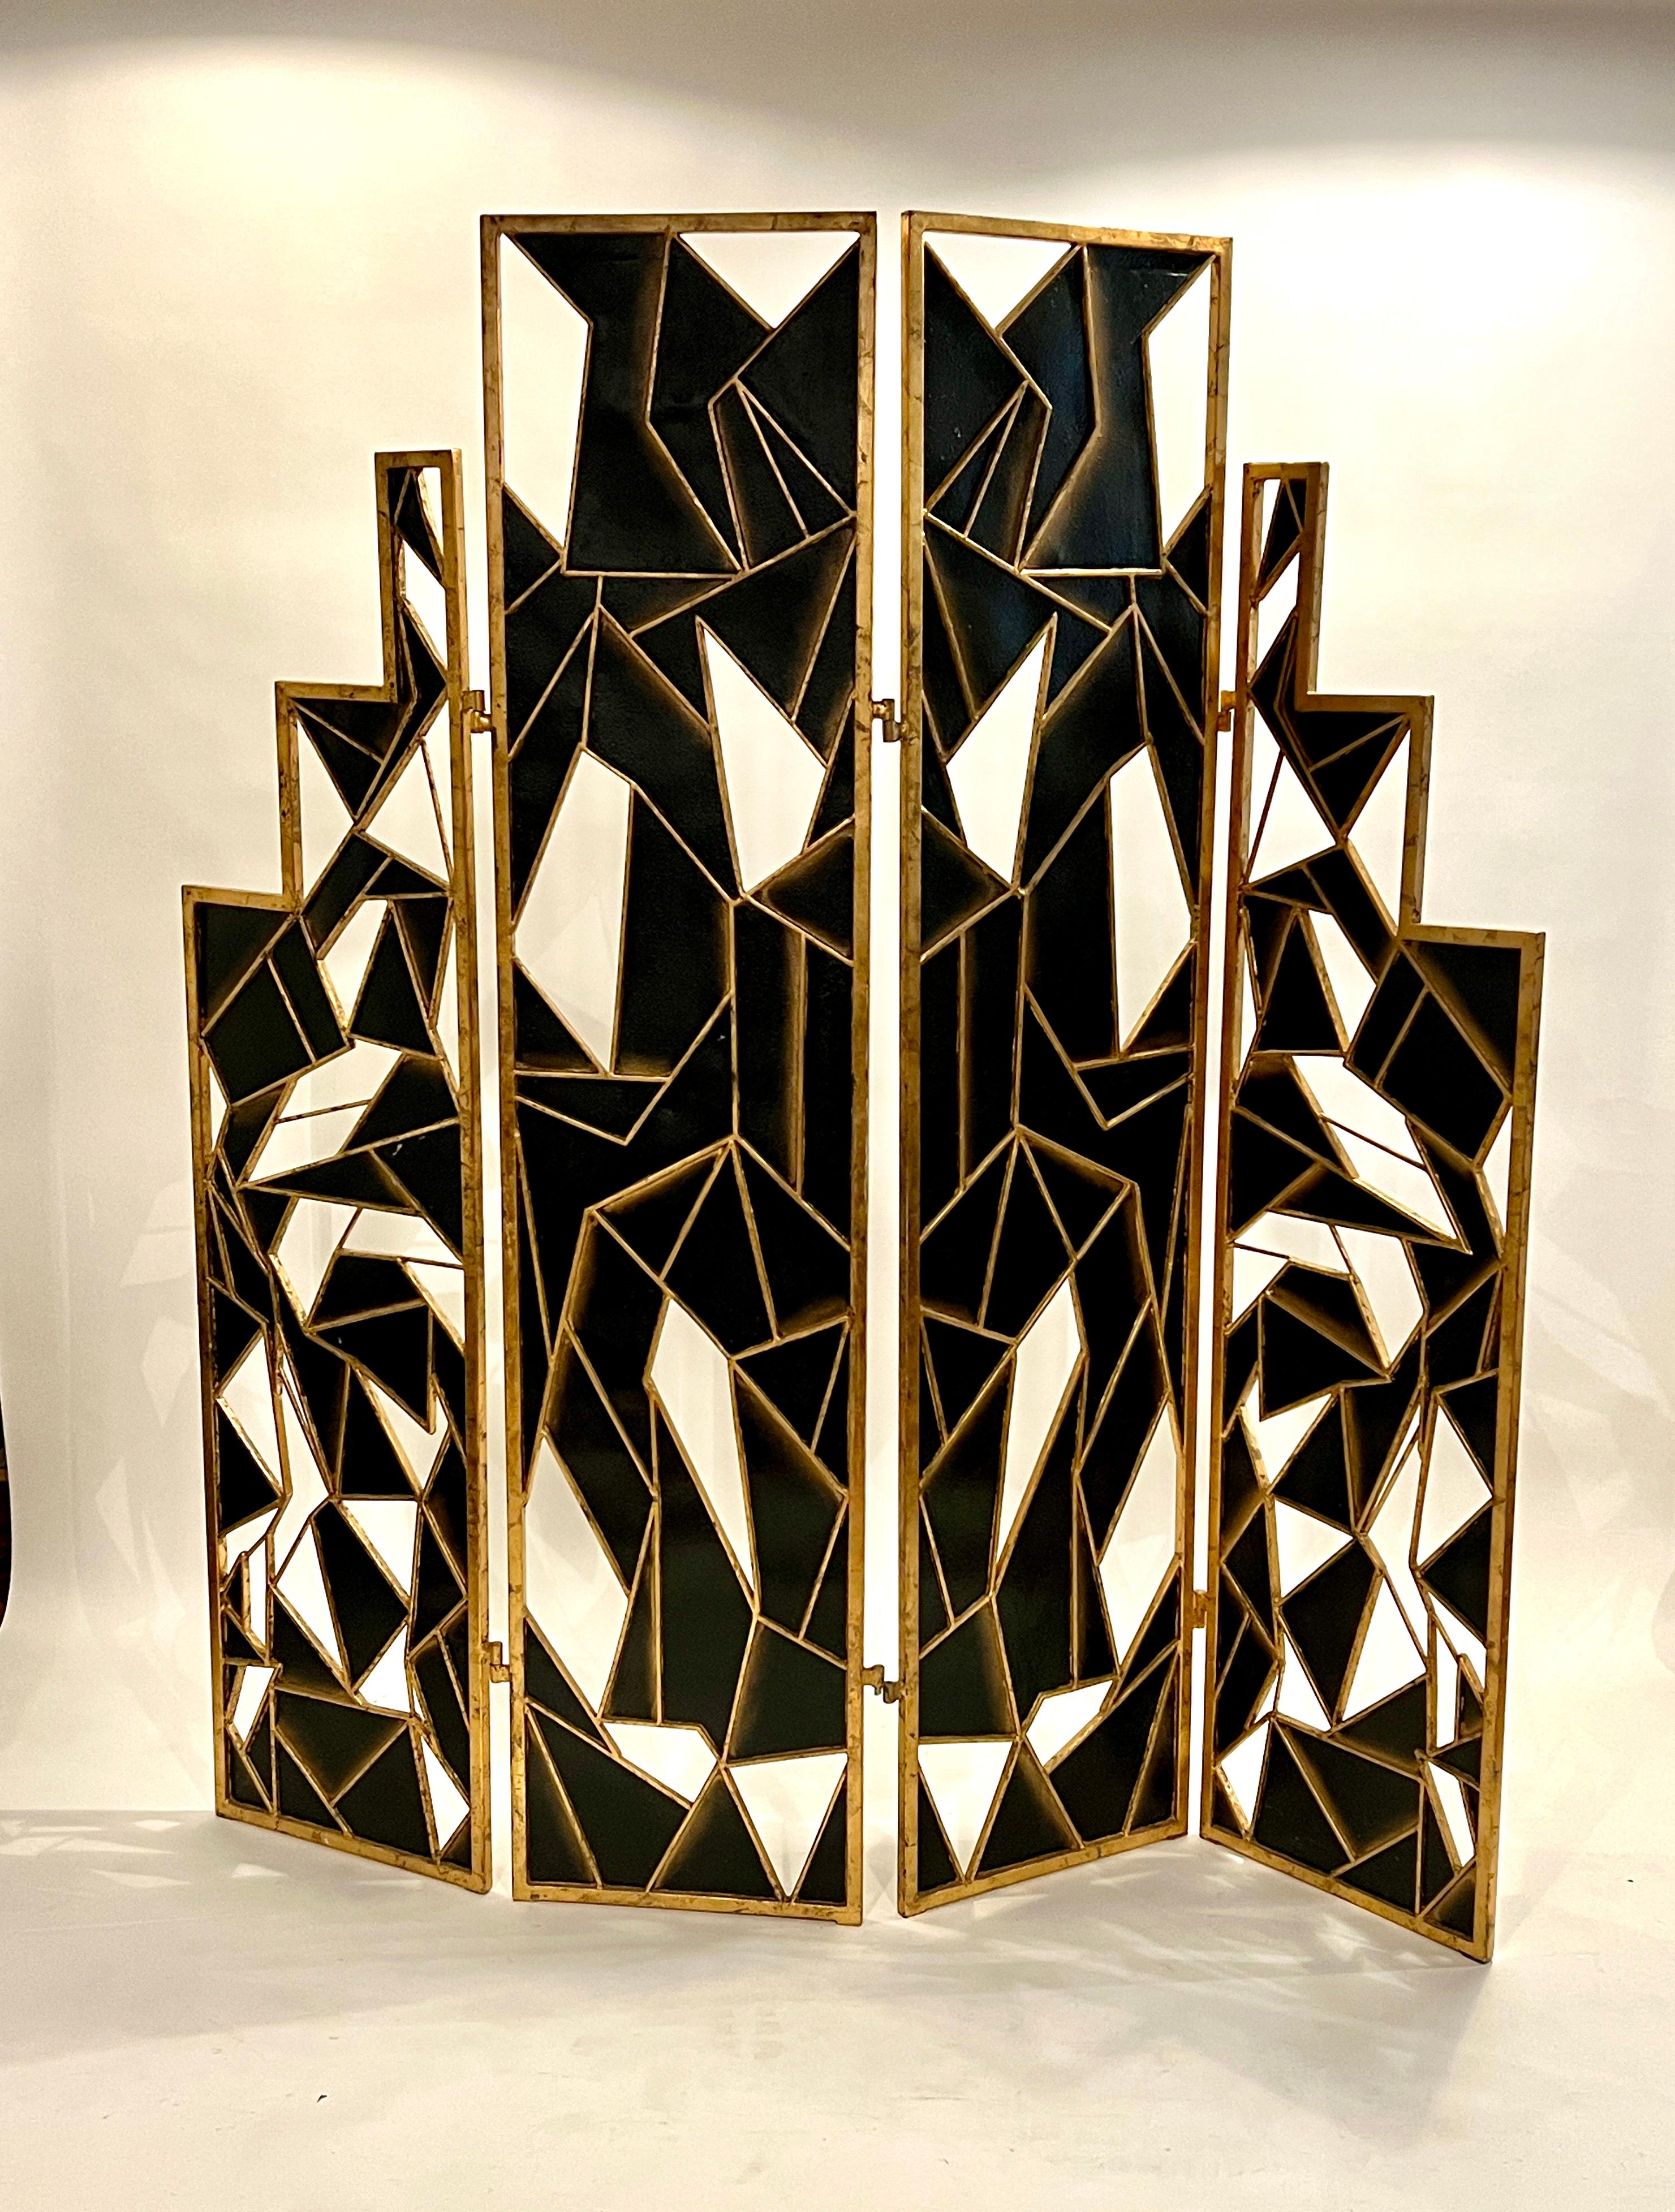 20th century art deco room divider crafted in a patina gold painted metal frame with black painted abstract panels and cut out windows. 4 panel screen can be separated by hook attachments and shows identical images on front and back, 